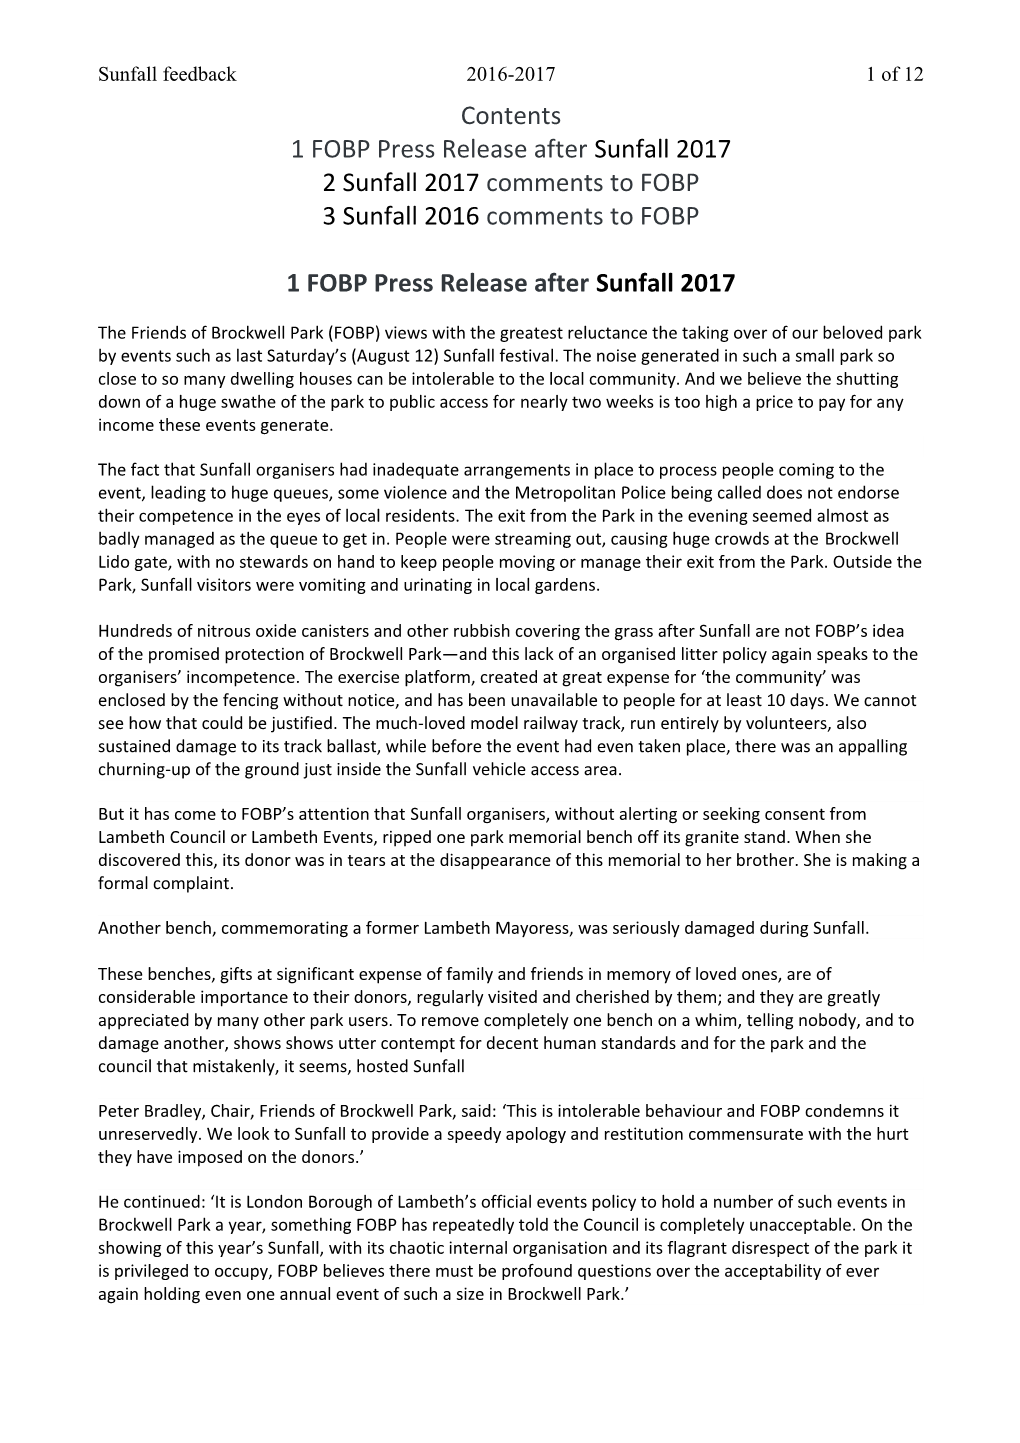 1 FOBP Press Release After Sunfall 2017